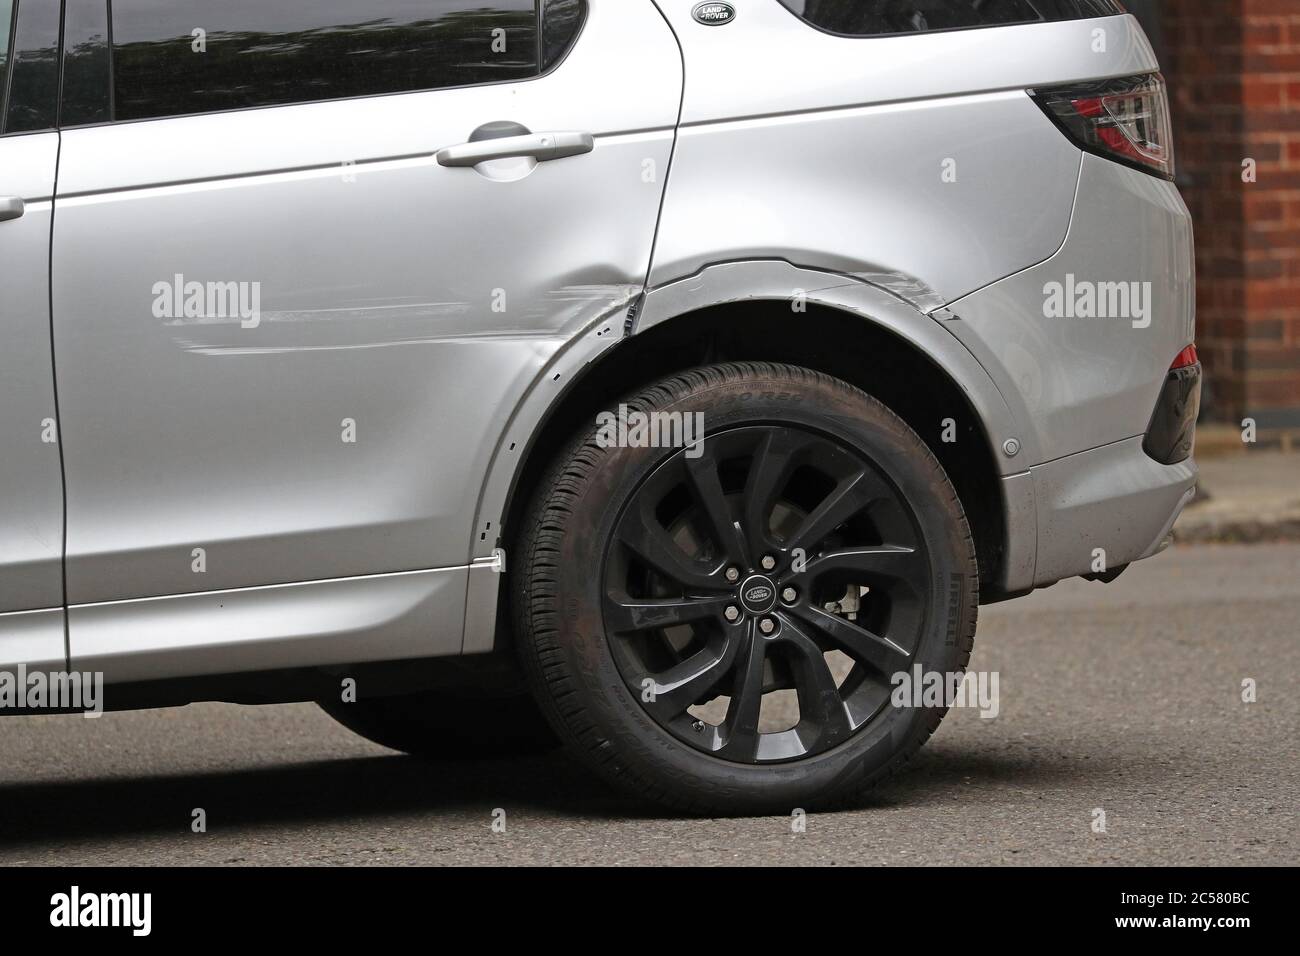 Damage visible on the rear of Dominic Cumming's Land Rover Discovery as it is parked in Downing Street, London. Stock Photo